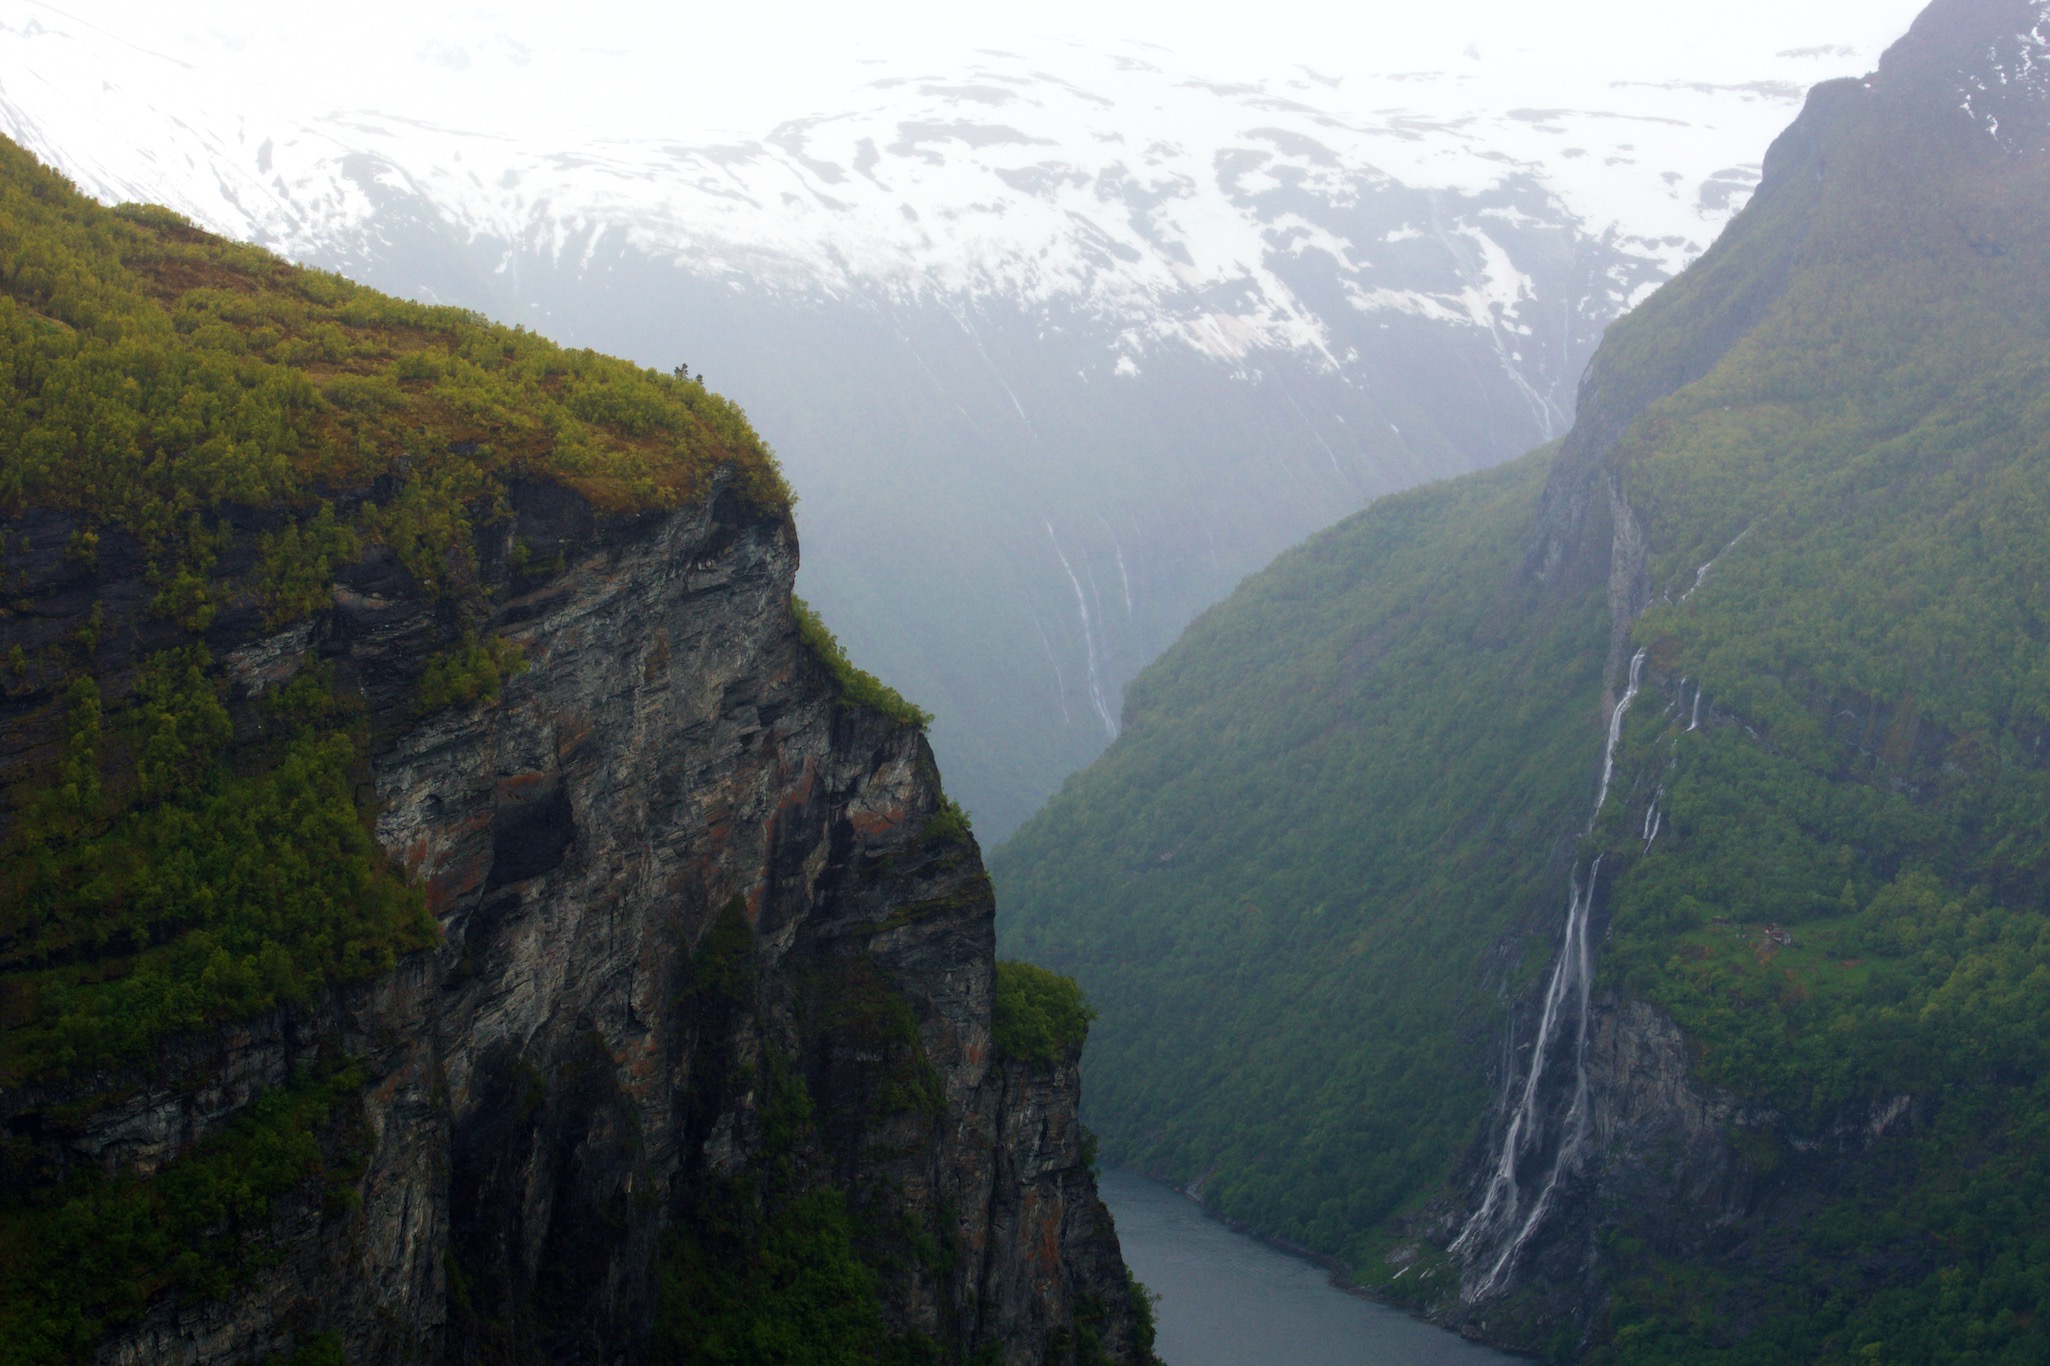 View looking down over the mountains and fjord in Geiranger, Norway